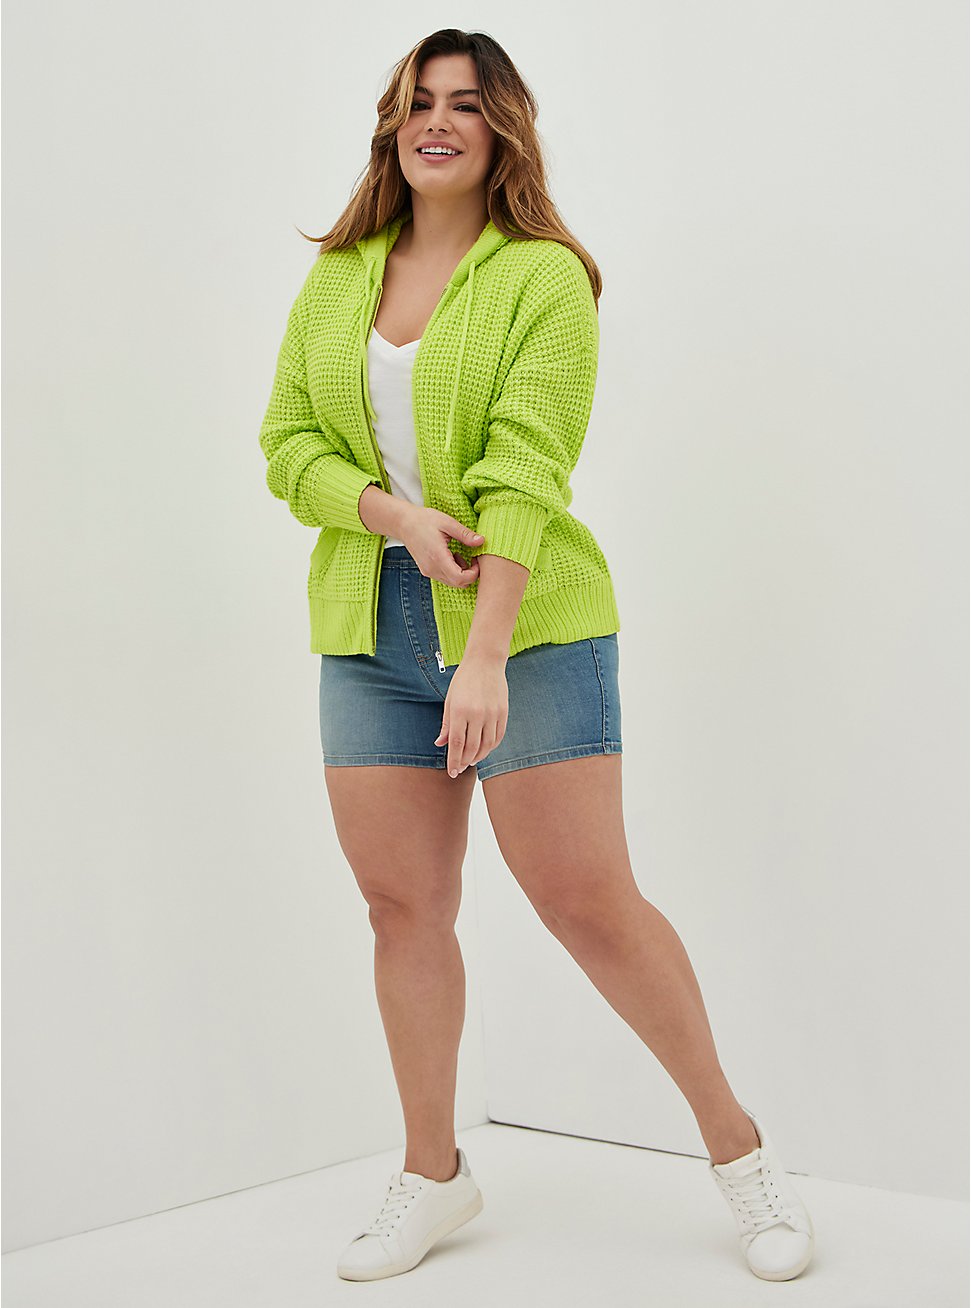 Plus Size Chunky Zip Sweater Hoodie - Lime, LIME, hi-res